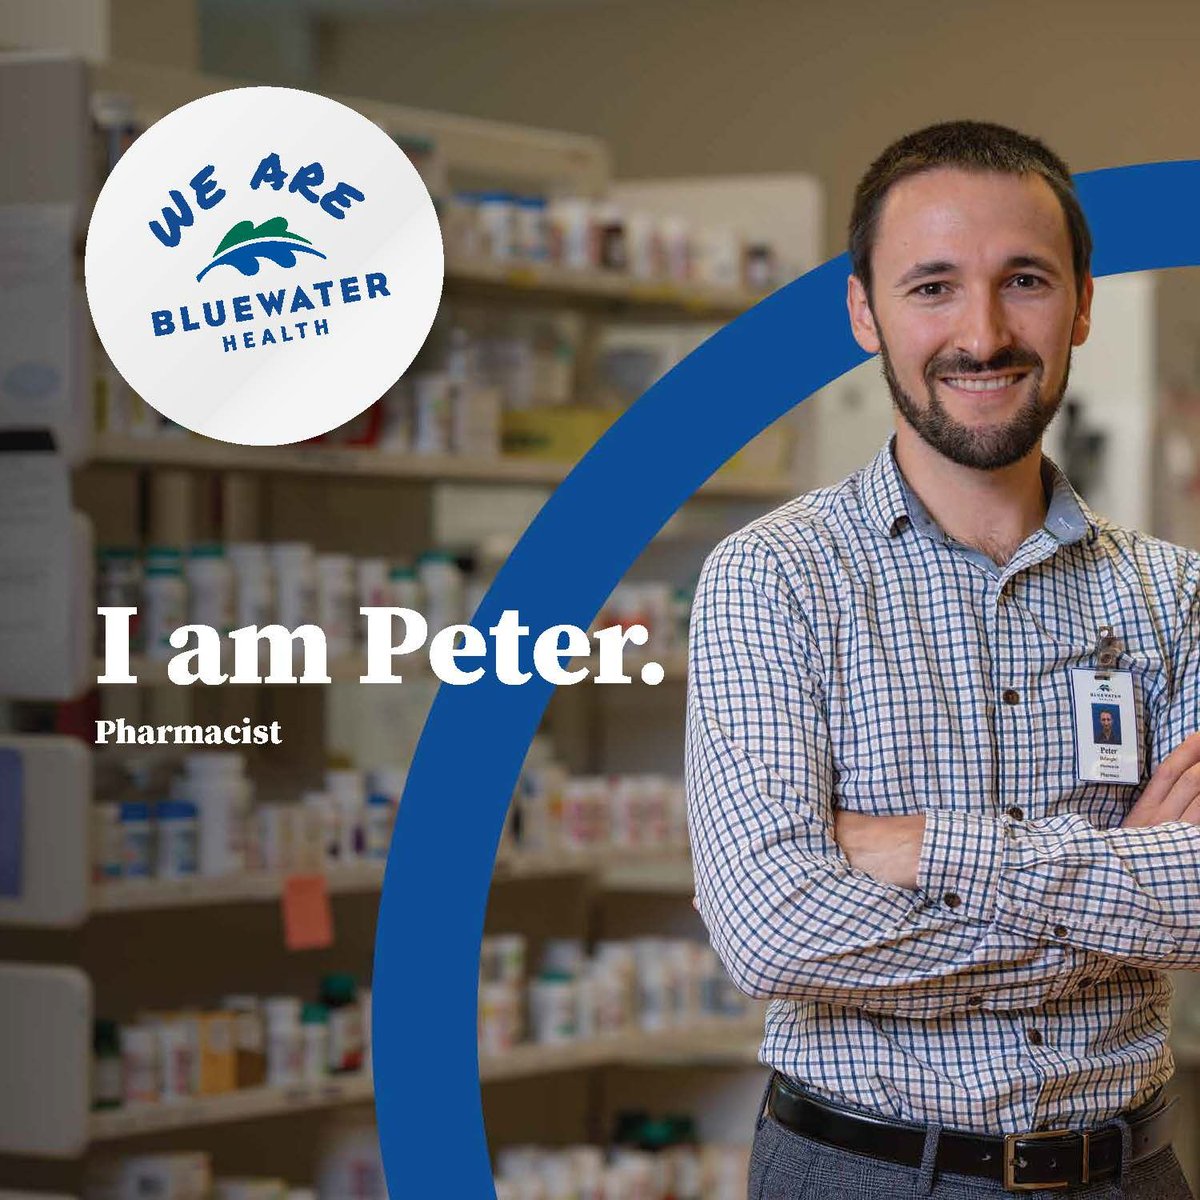 March is #PharmacyAppreciationMonth. We are featuring Peter, a BWH Pharmacist who supports hospital inpatient services. “Solving problems, looking for unique solutions and improving patient care is the most rewarding aspect of my career.' Peter's story. buff.ly/3VoqwGP